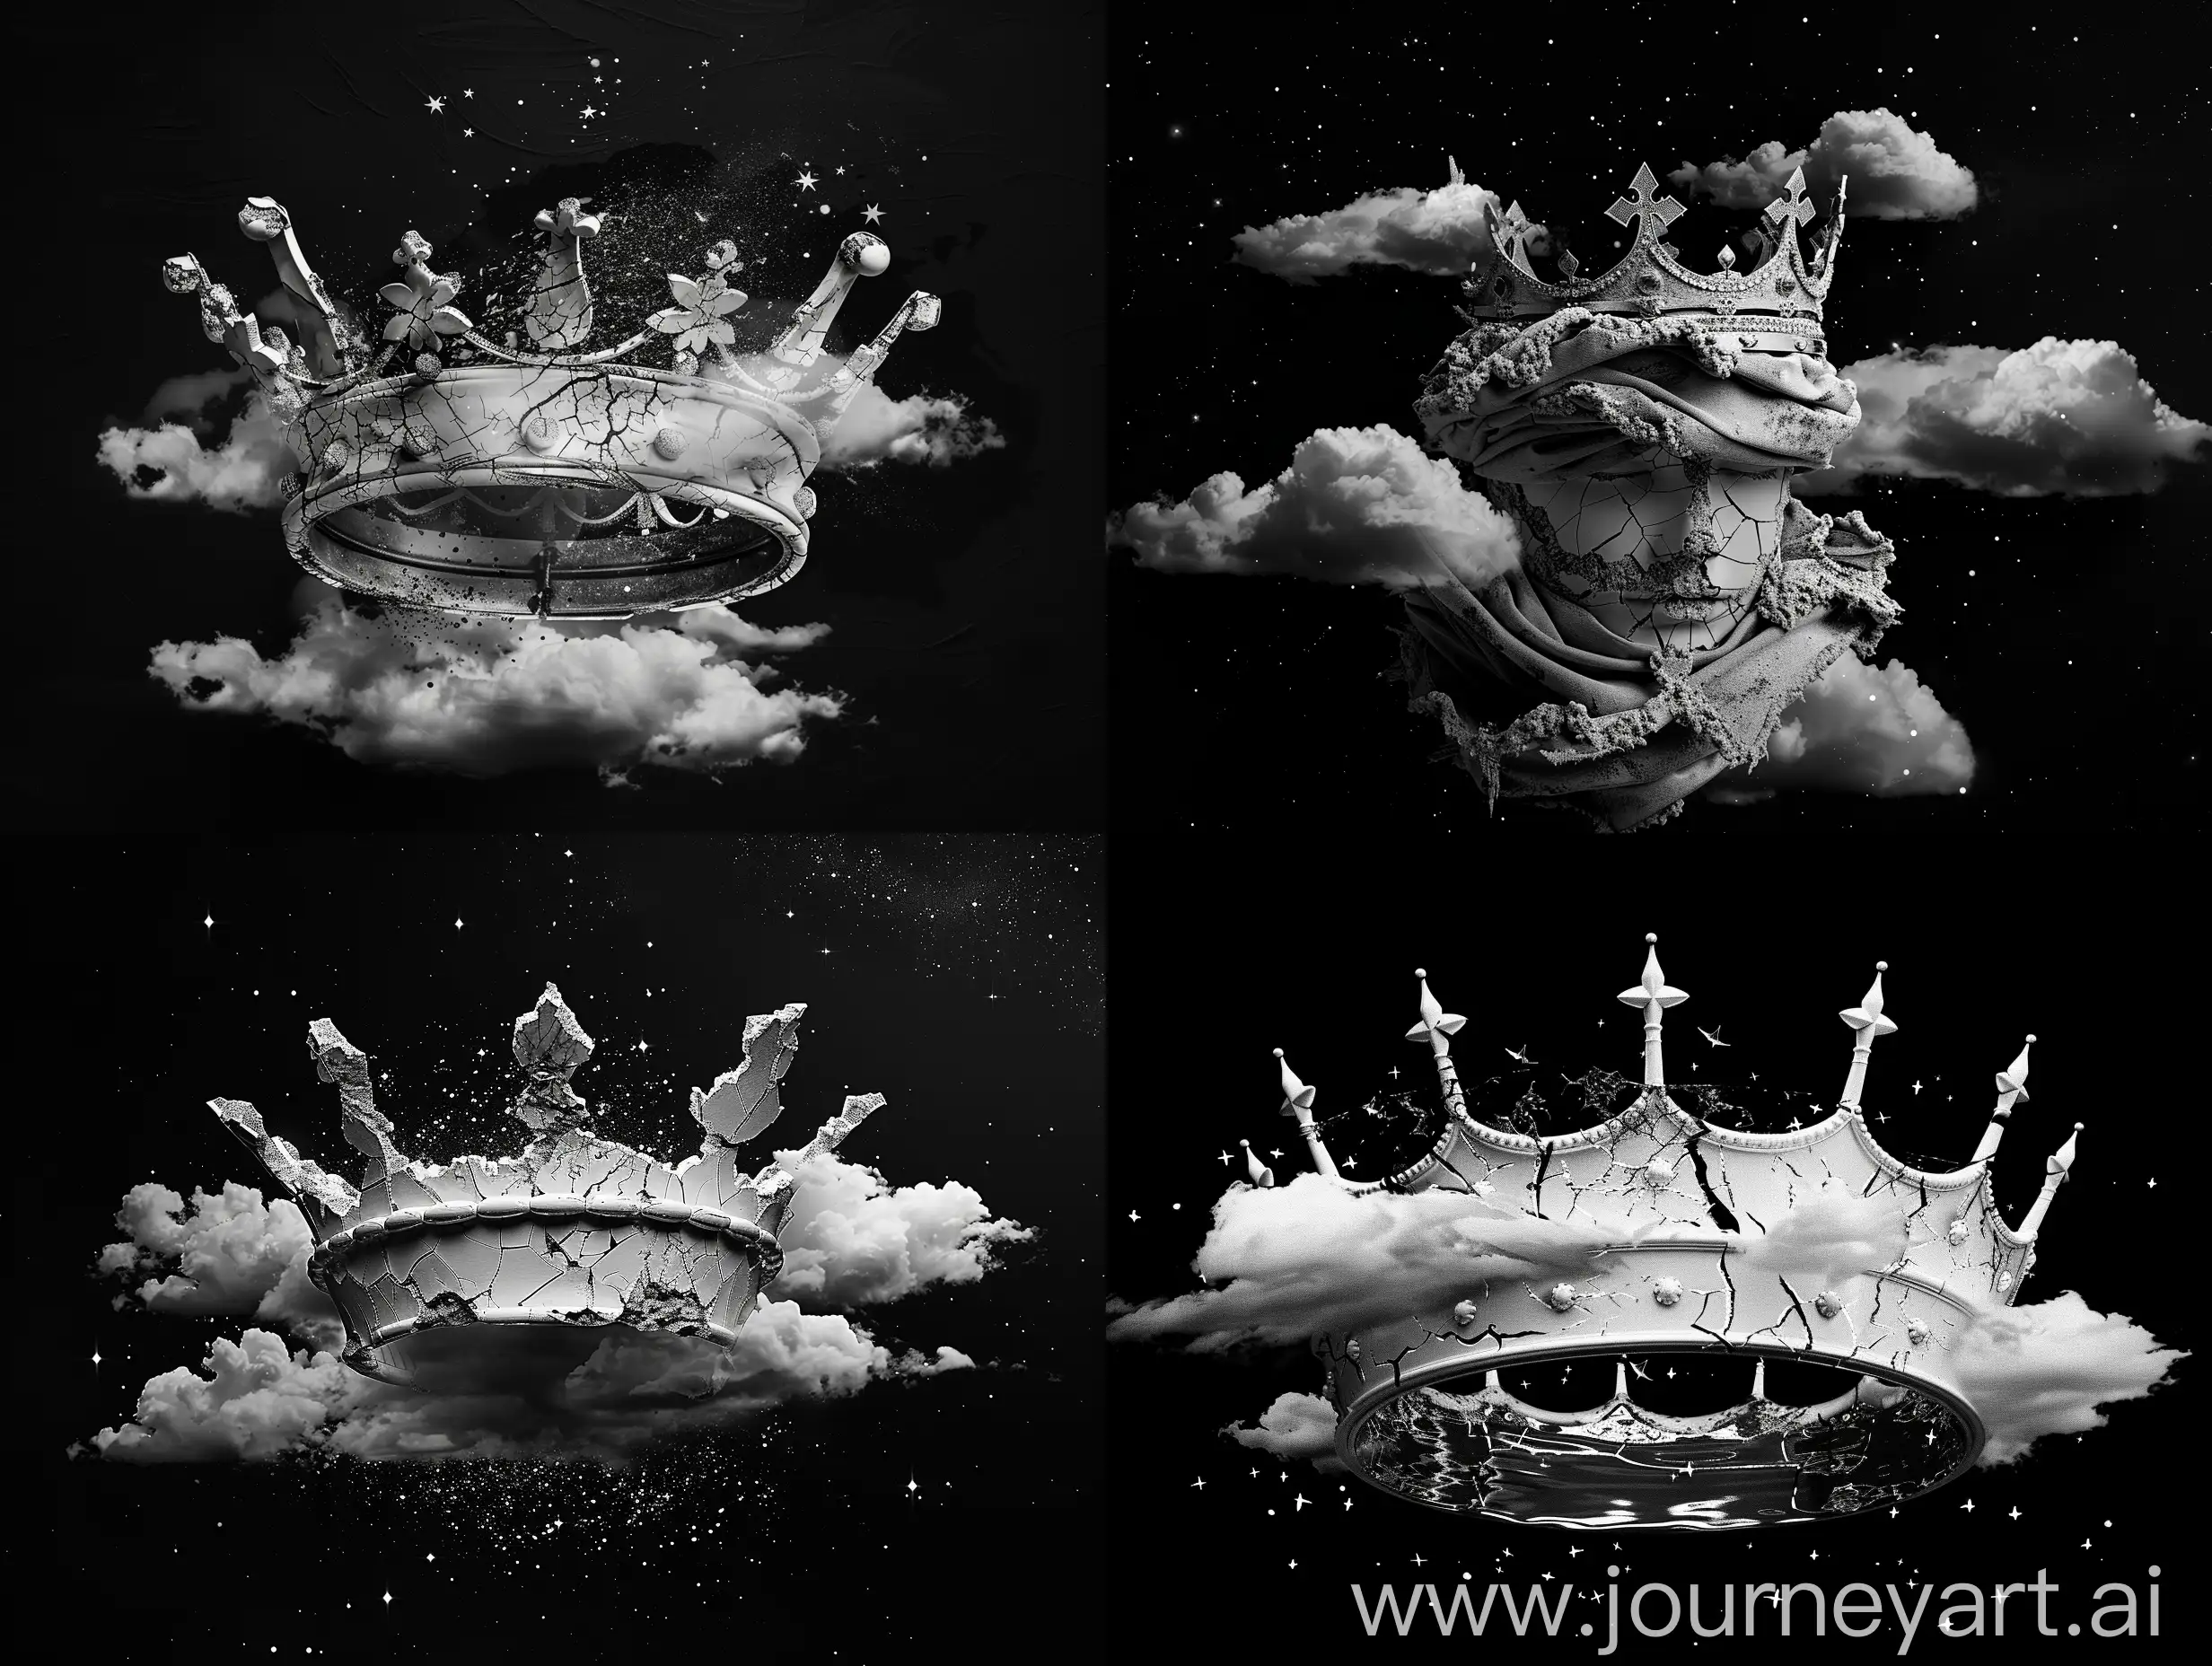 black and white minimal cracked white queen's crown wrapped in ominous clouds and stars against black background Image